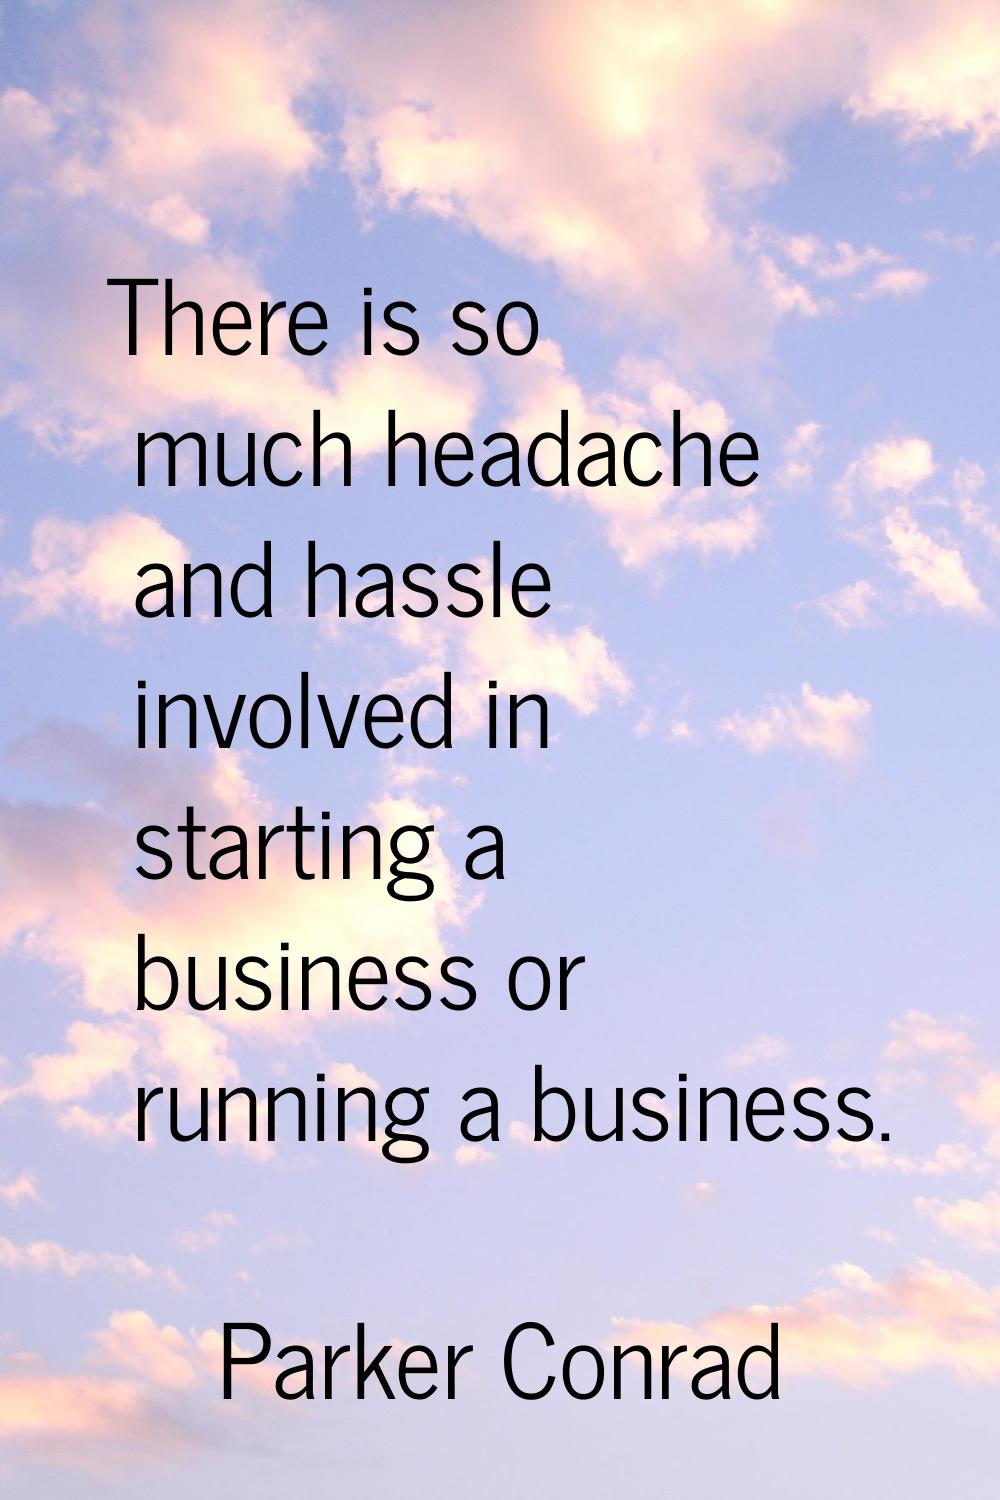 There is so much headache and hassle involved in starting a business or running a business.